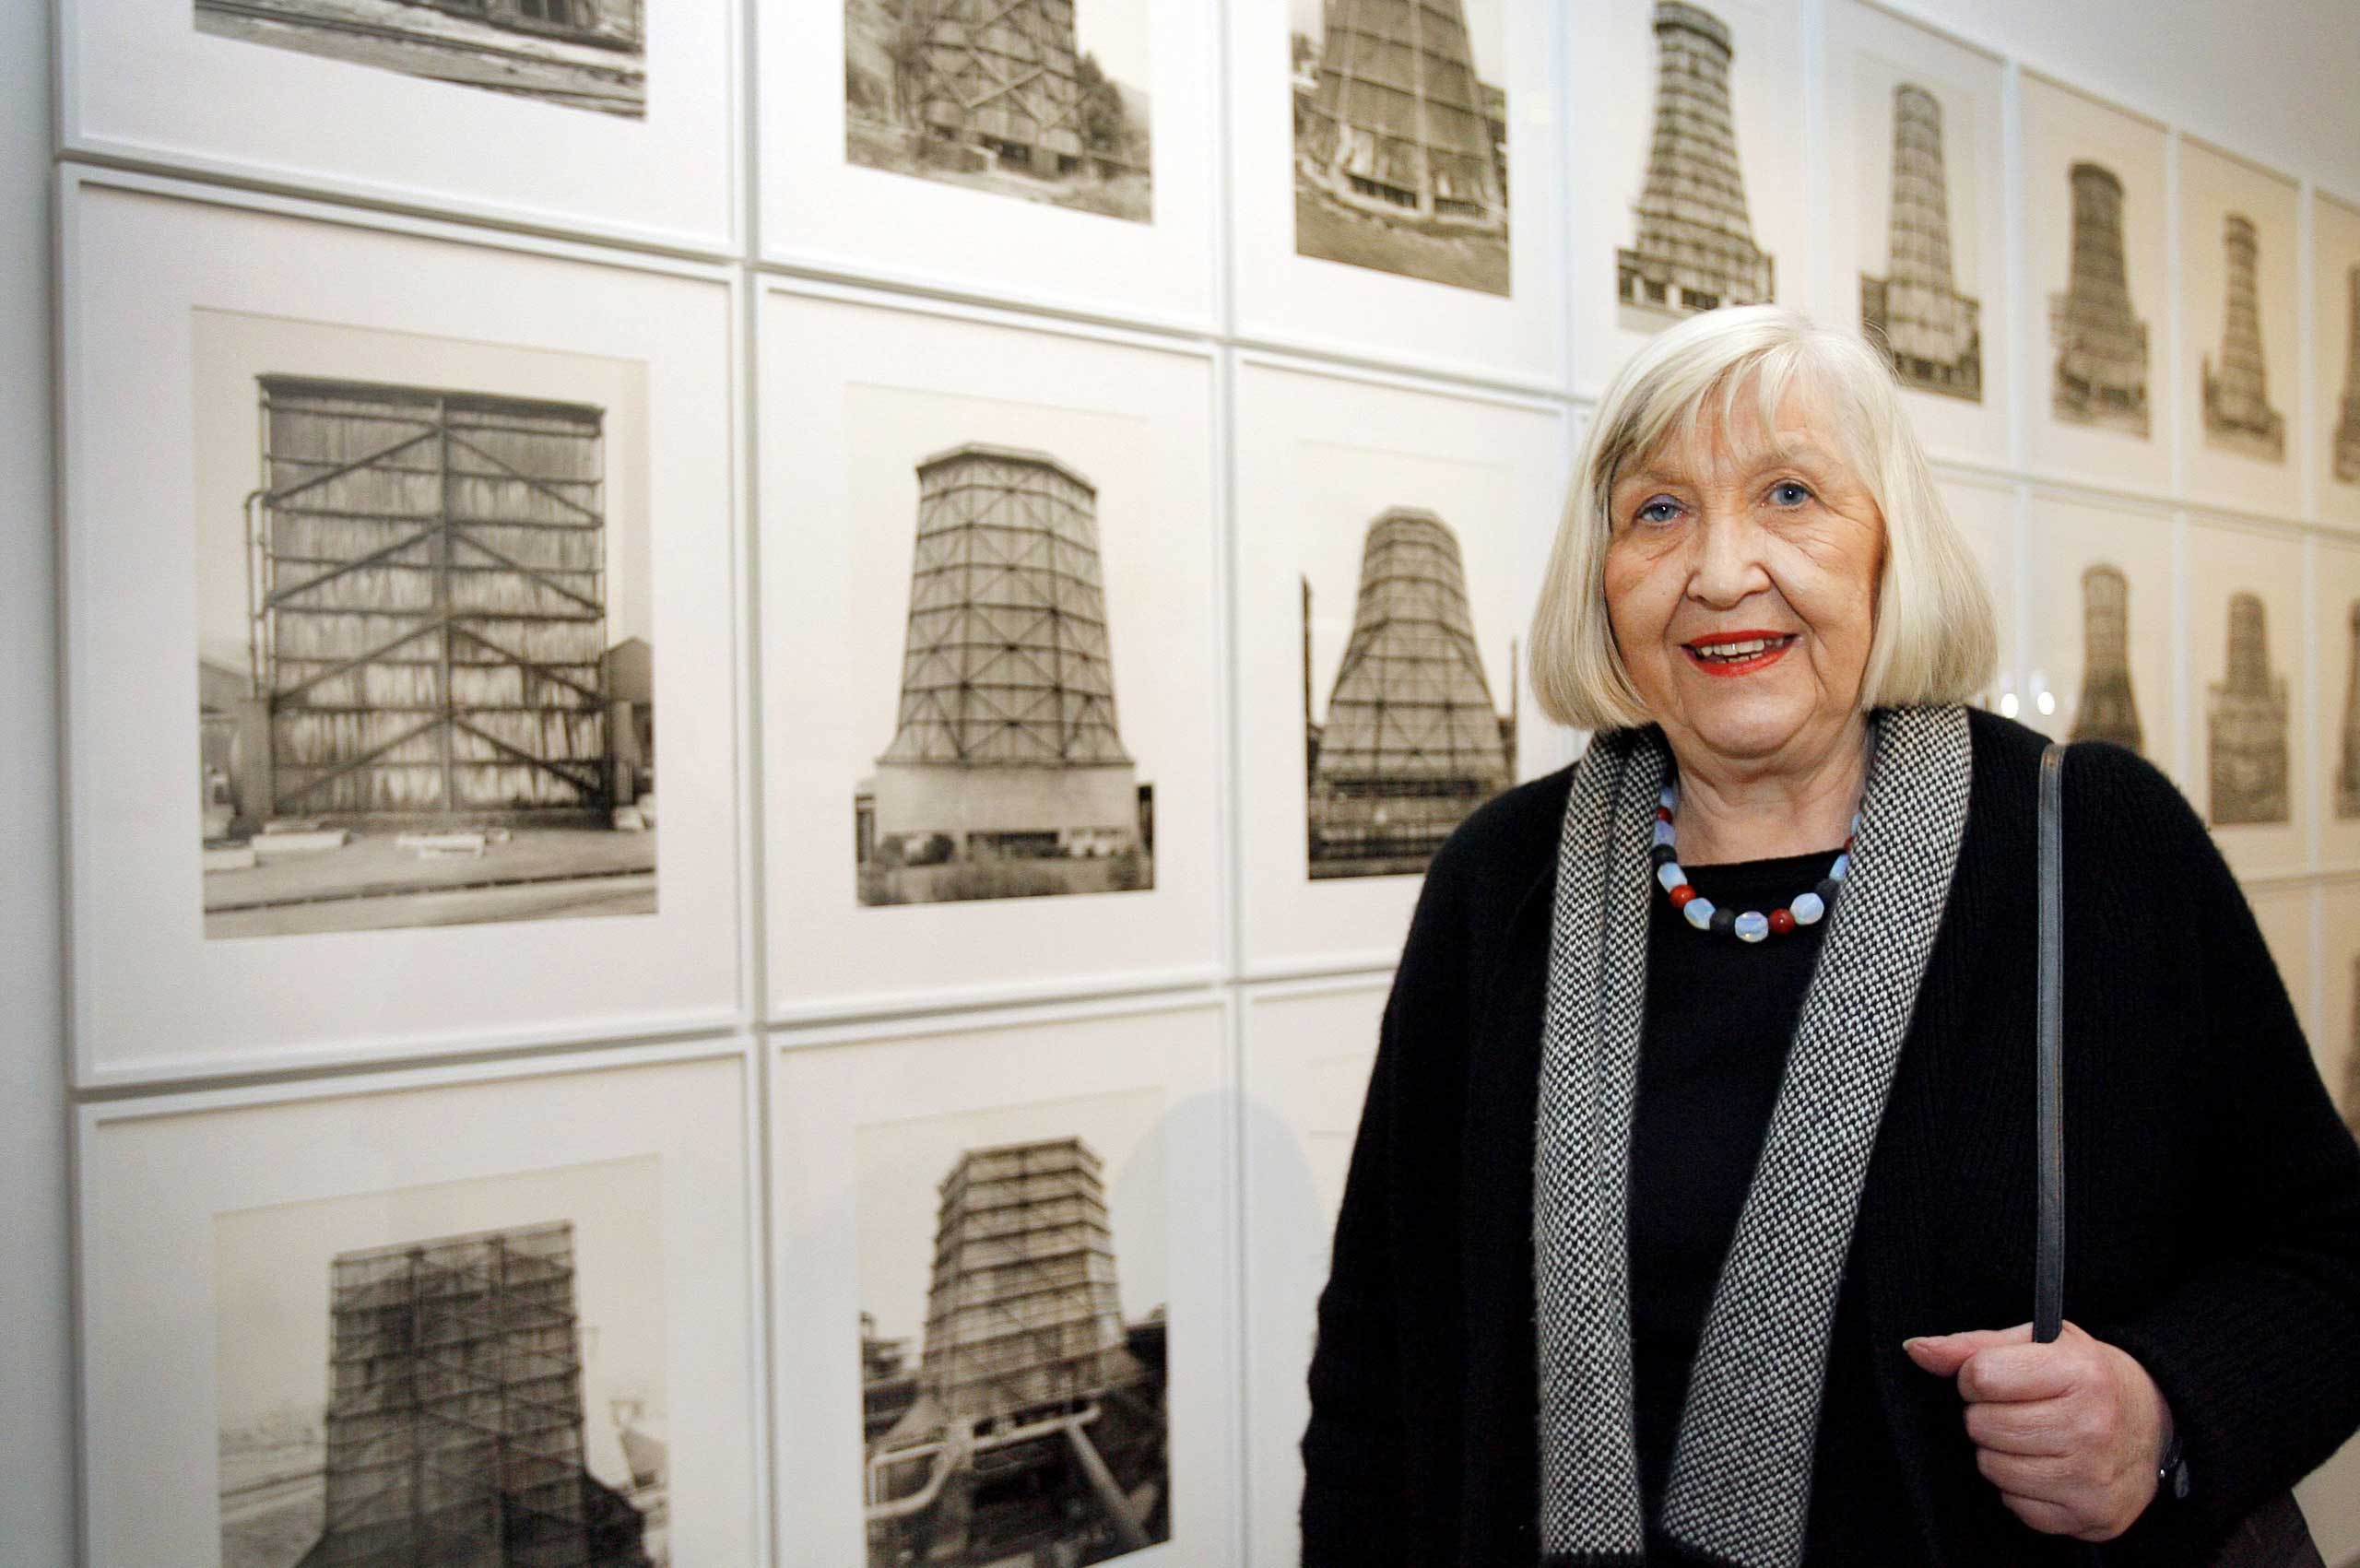 German photographer Hilla Becher posing next to her photo series "Cooling Towers" at the Musee d'Art Moderne de la Ville in Paris, France, on Oct. 2, 2008. (David Ebener—EPA)